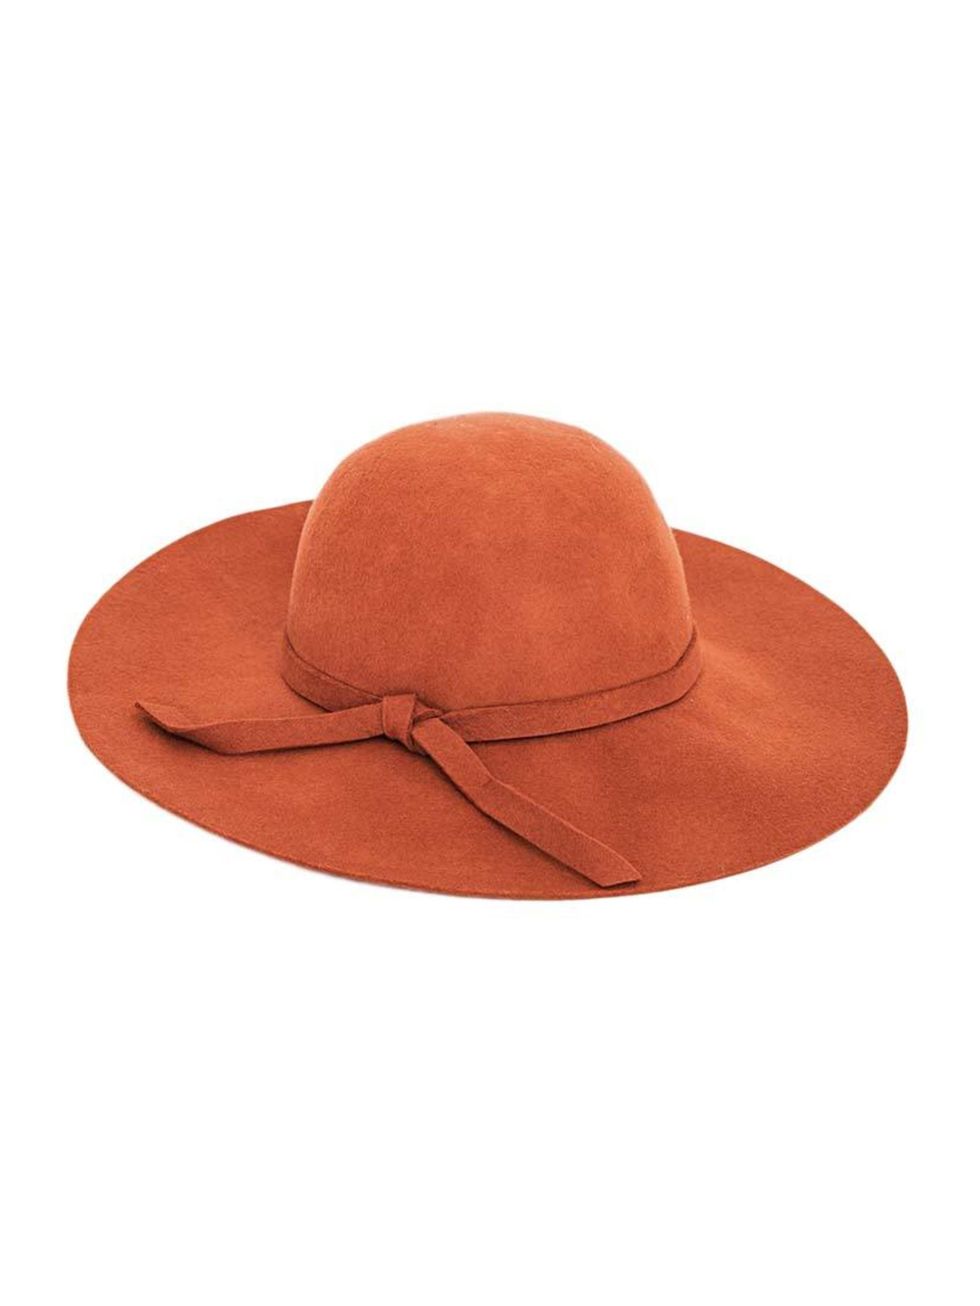 <p>Designer Charlotte Wallace is a sucker for a good hat.</p>

<p> </p>

<p><a href="http://www.missguided.co.uk/catalog/product/view/id/137106/s/claris-wool-floppy-hat-rust/category/642/" target="_blank">Missguided</a> hat, £14.99</p>